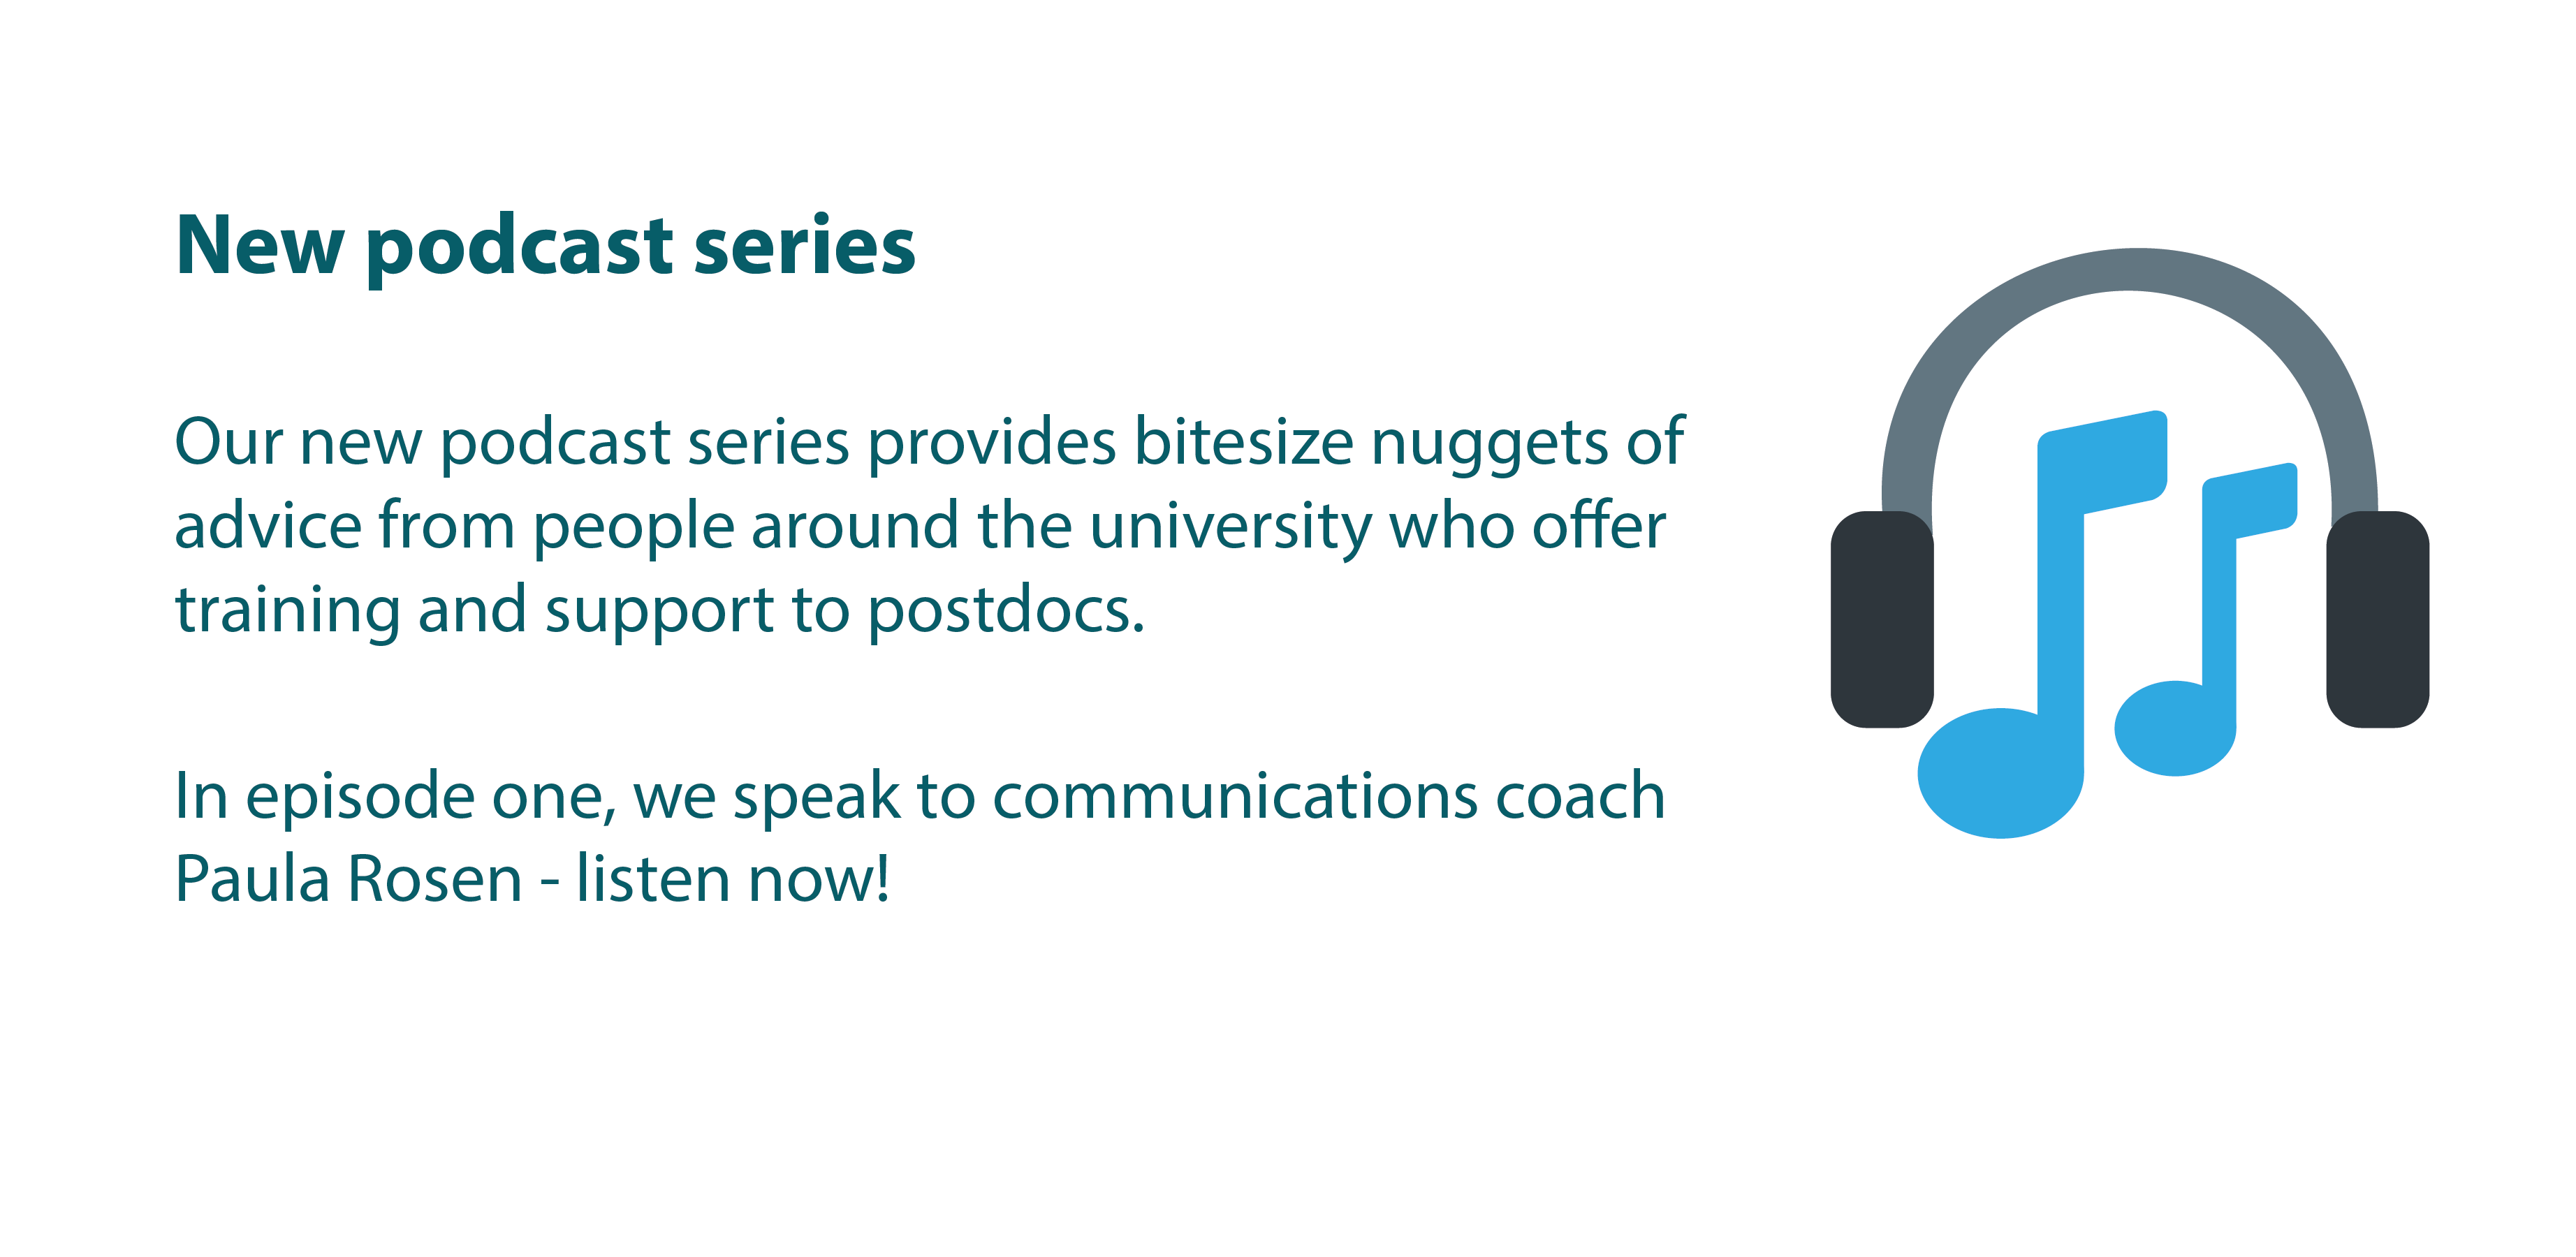 Text reads: Our new podcast series provides bitesize nuggets of advice from people around the university who offer training to postdocs. In episode one, we speak to communications coach Paula Rosen.